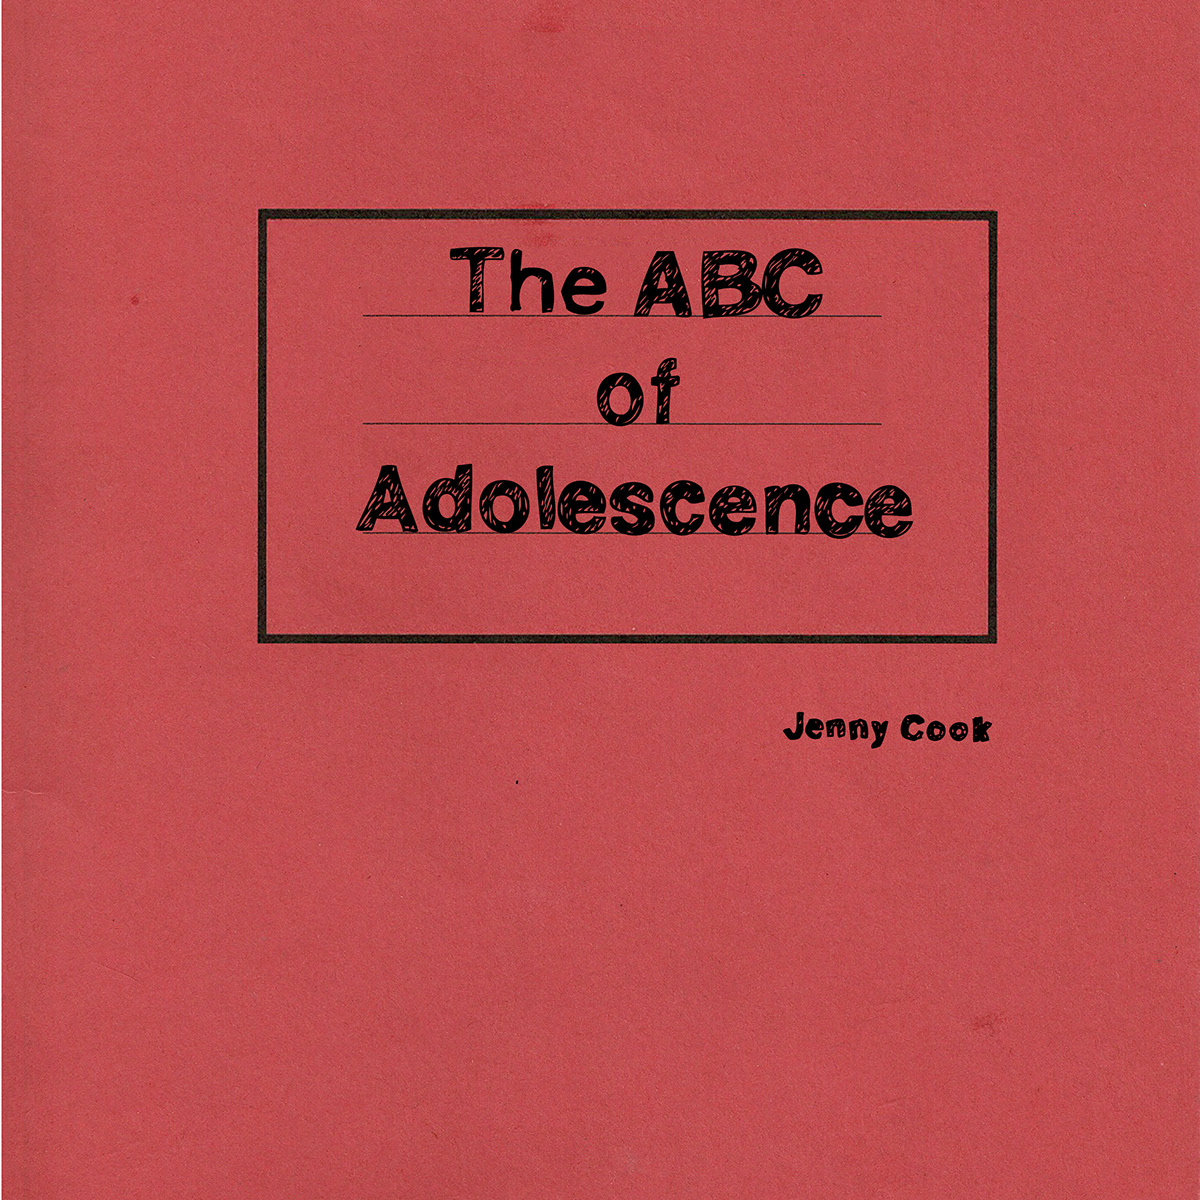 Jenny Cook falmouth university  University College Falmouth adolescence teenagers